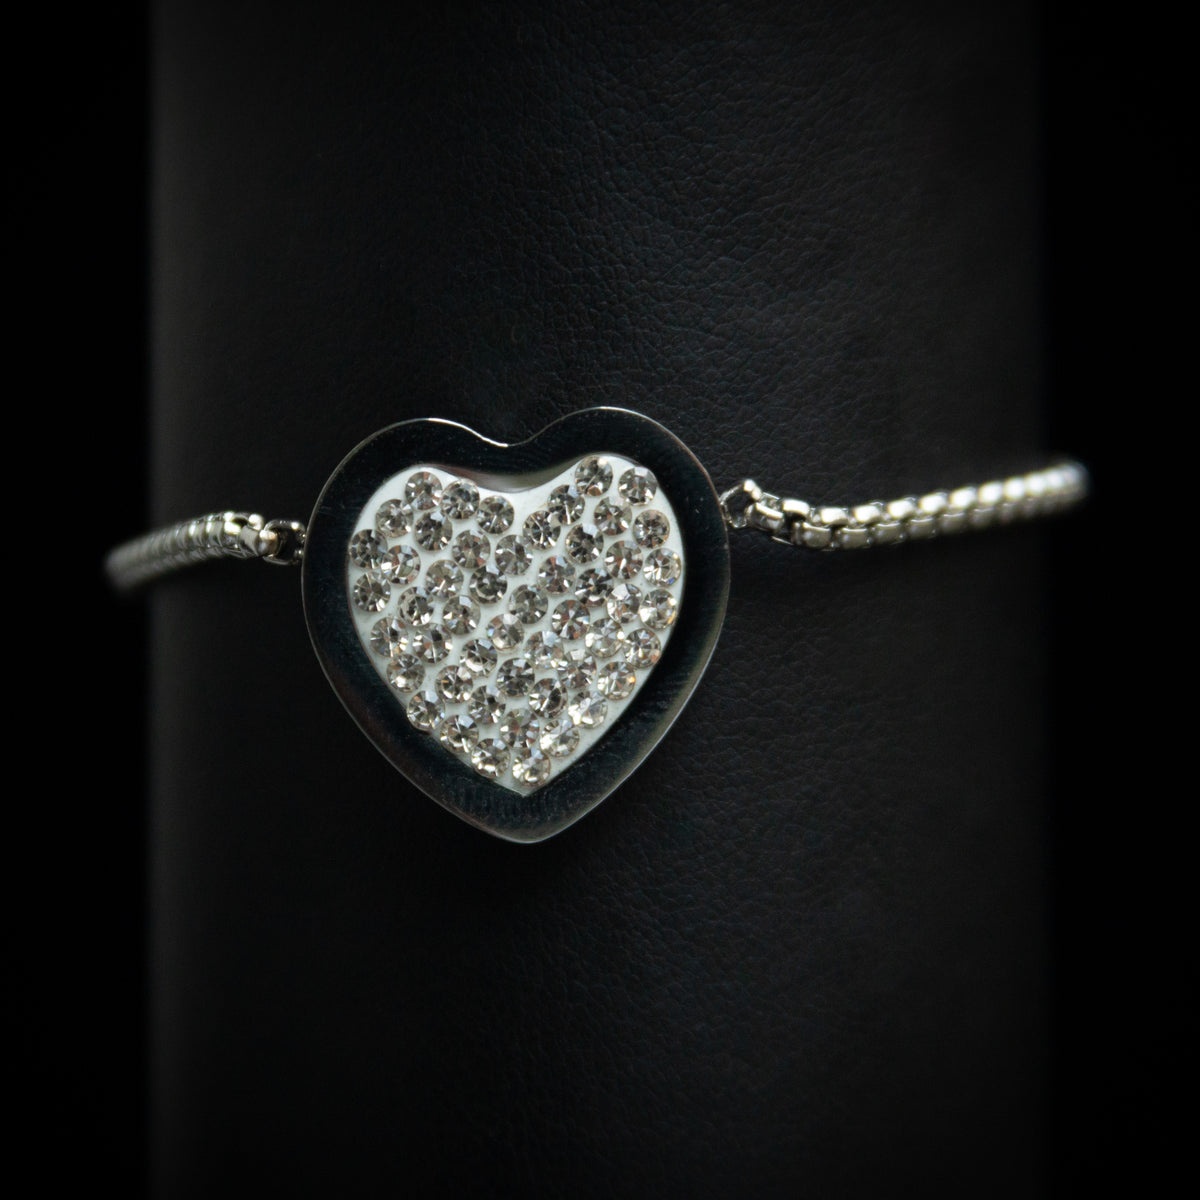 Heart Bracelet Silver With Clear Crystal Stones